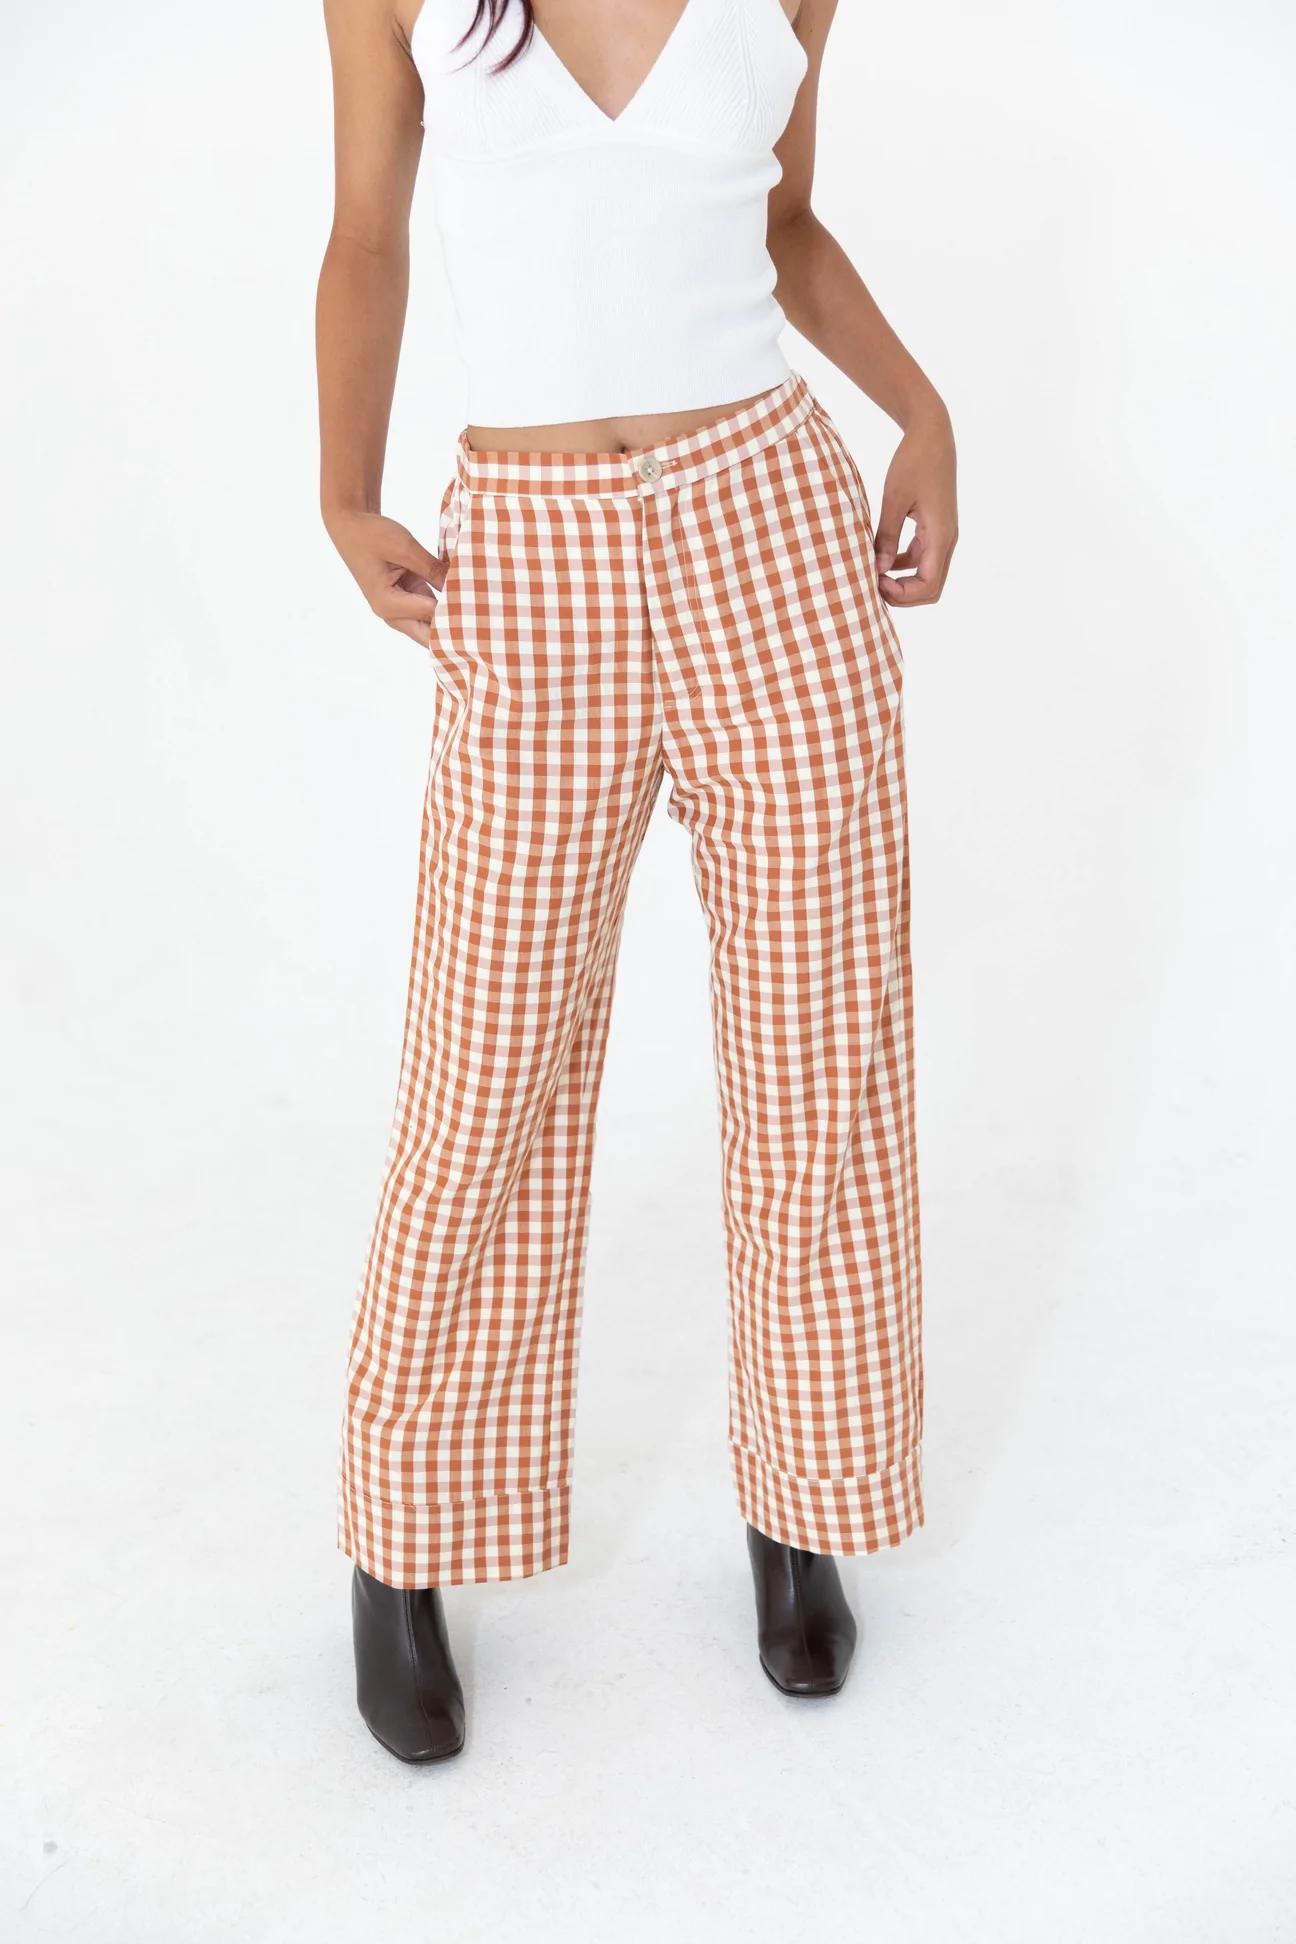 Product Image for Spring Gingham Pant, Rust